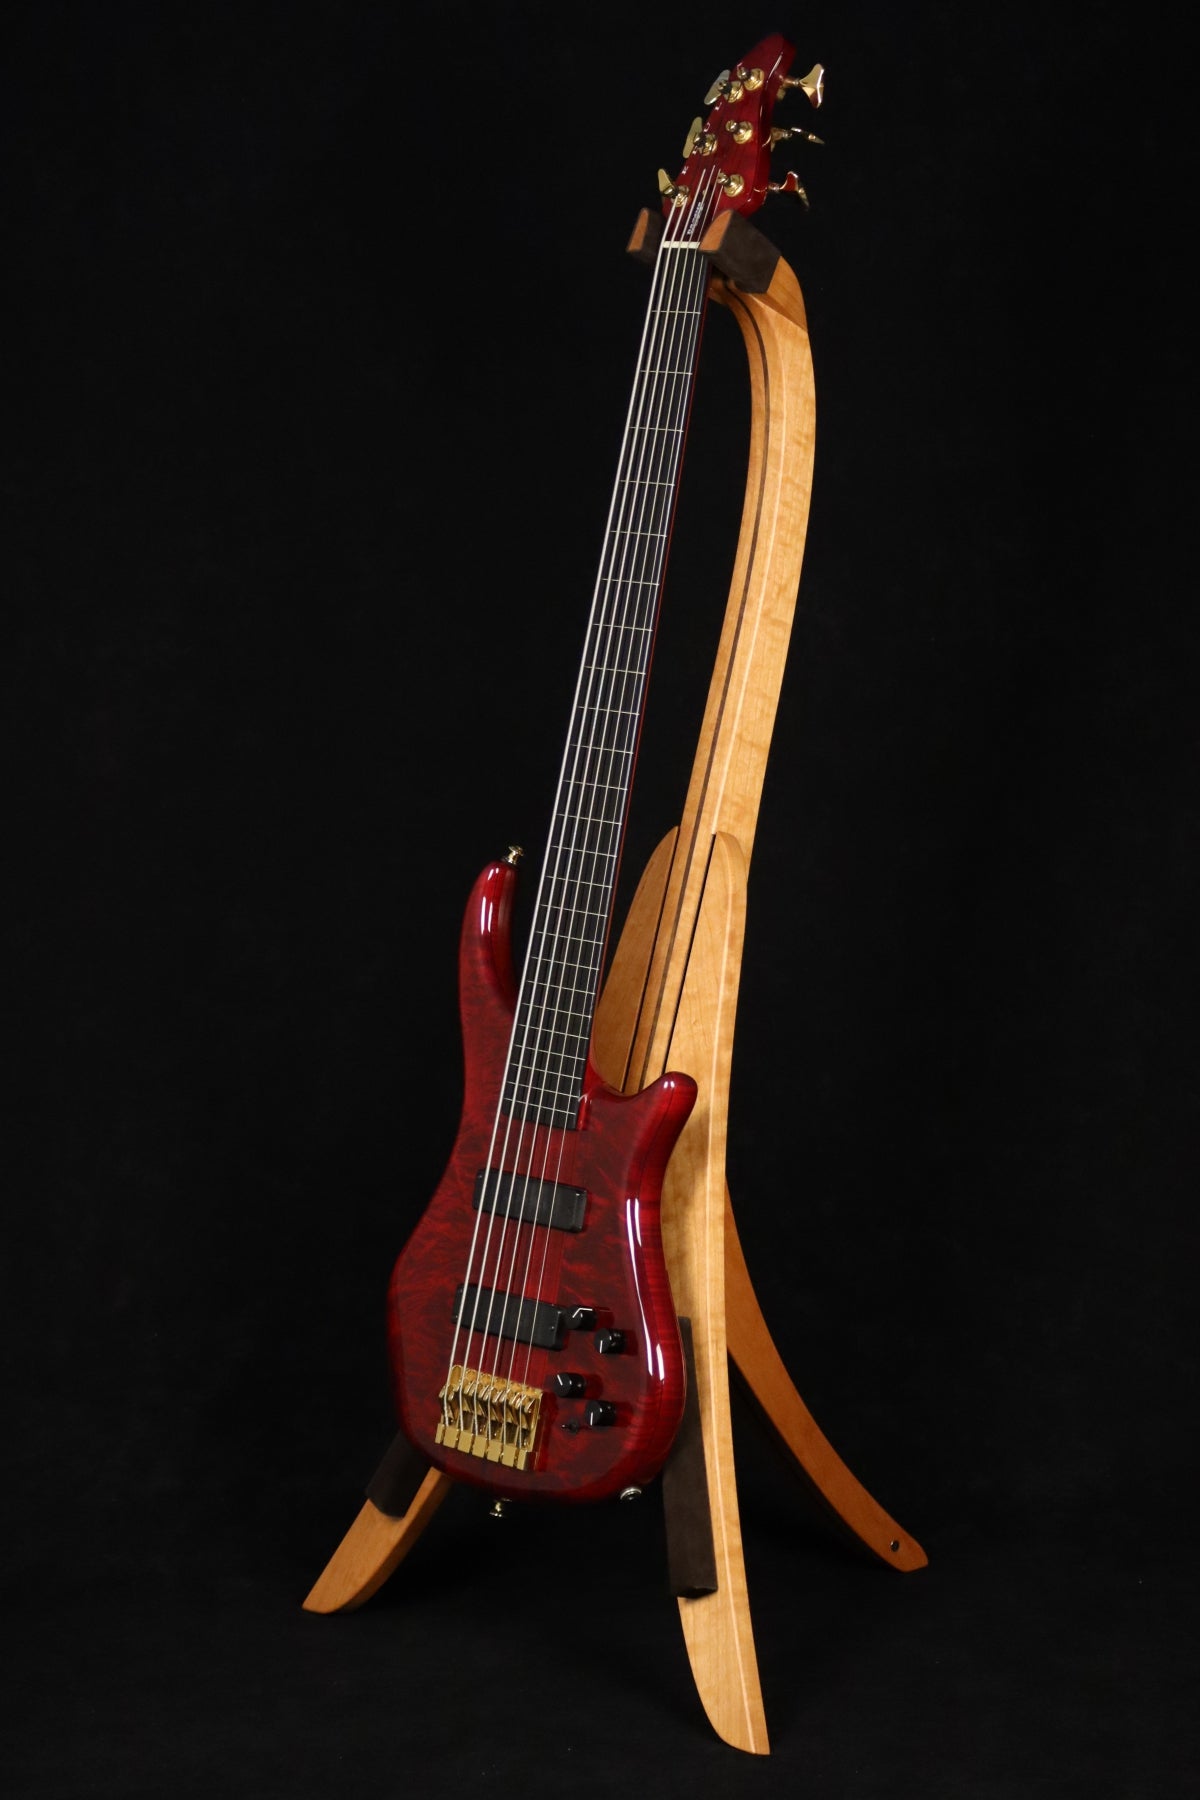 Folding cherry and walnut wood electric bass guitar floor stand full front image with Pedulla 6 string fretless bass